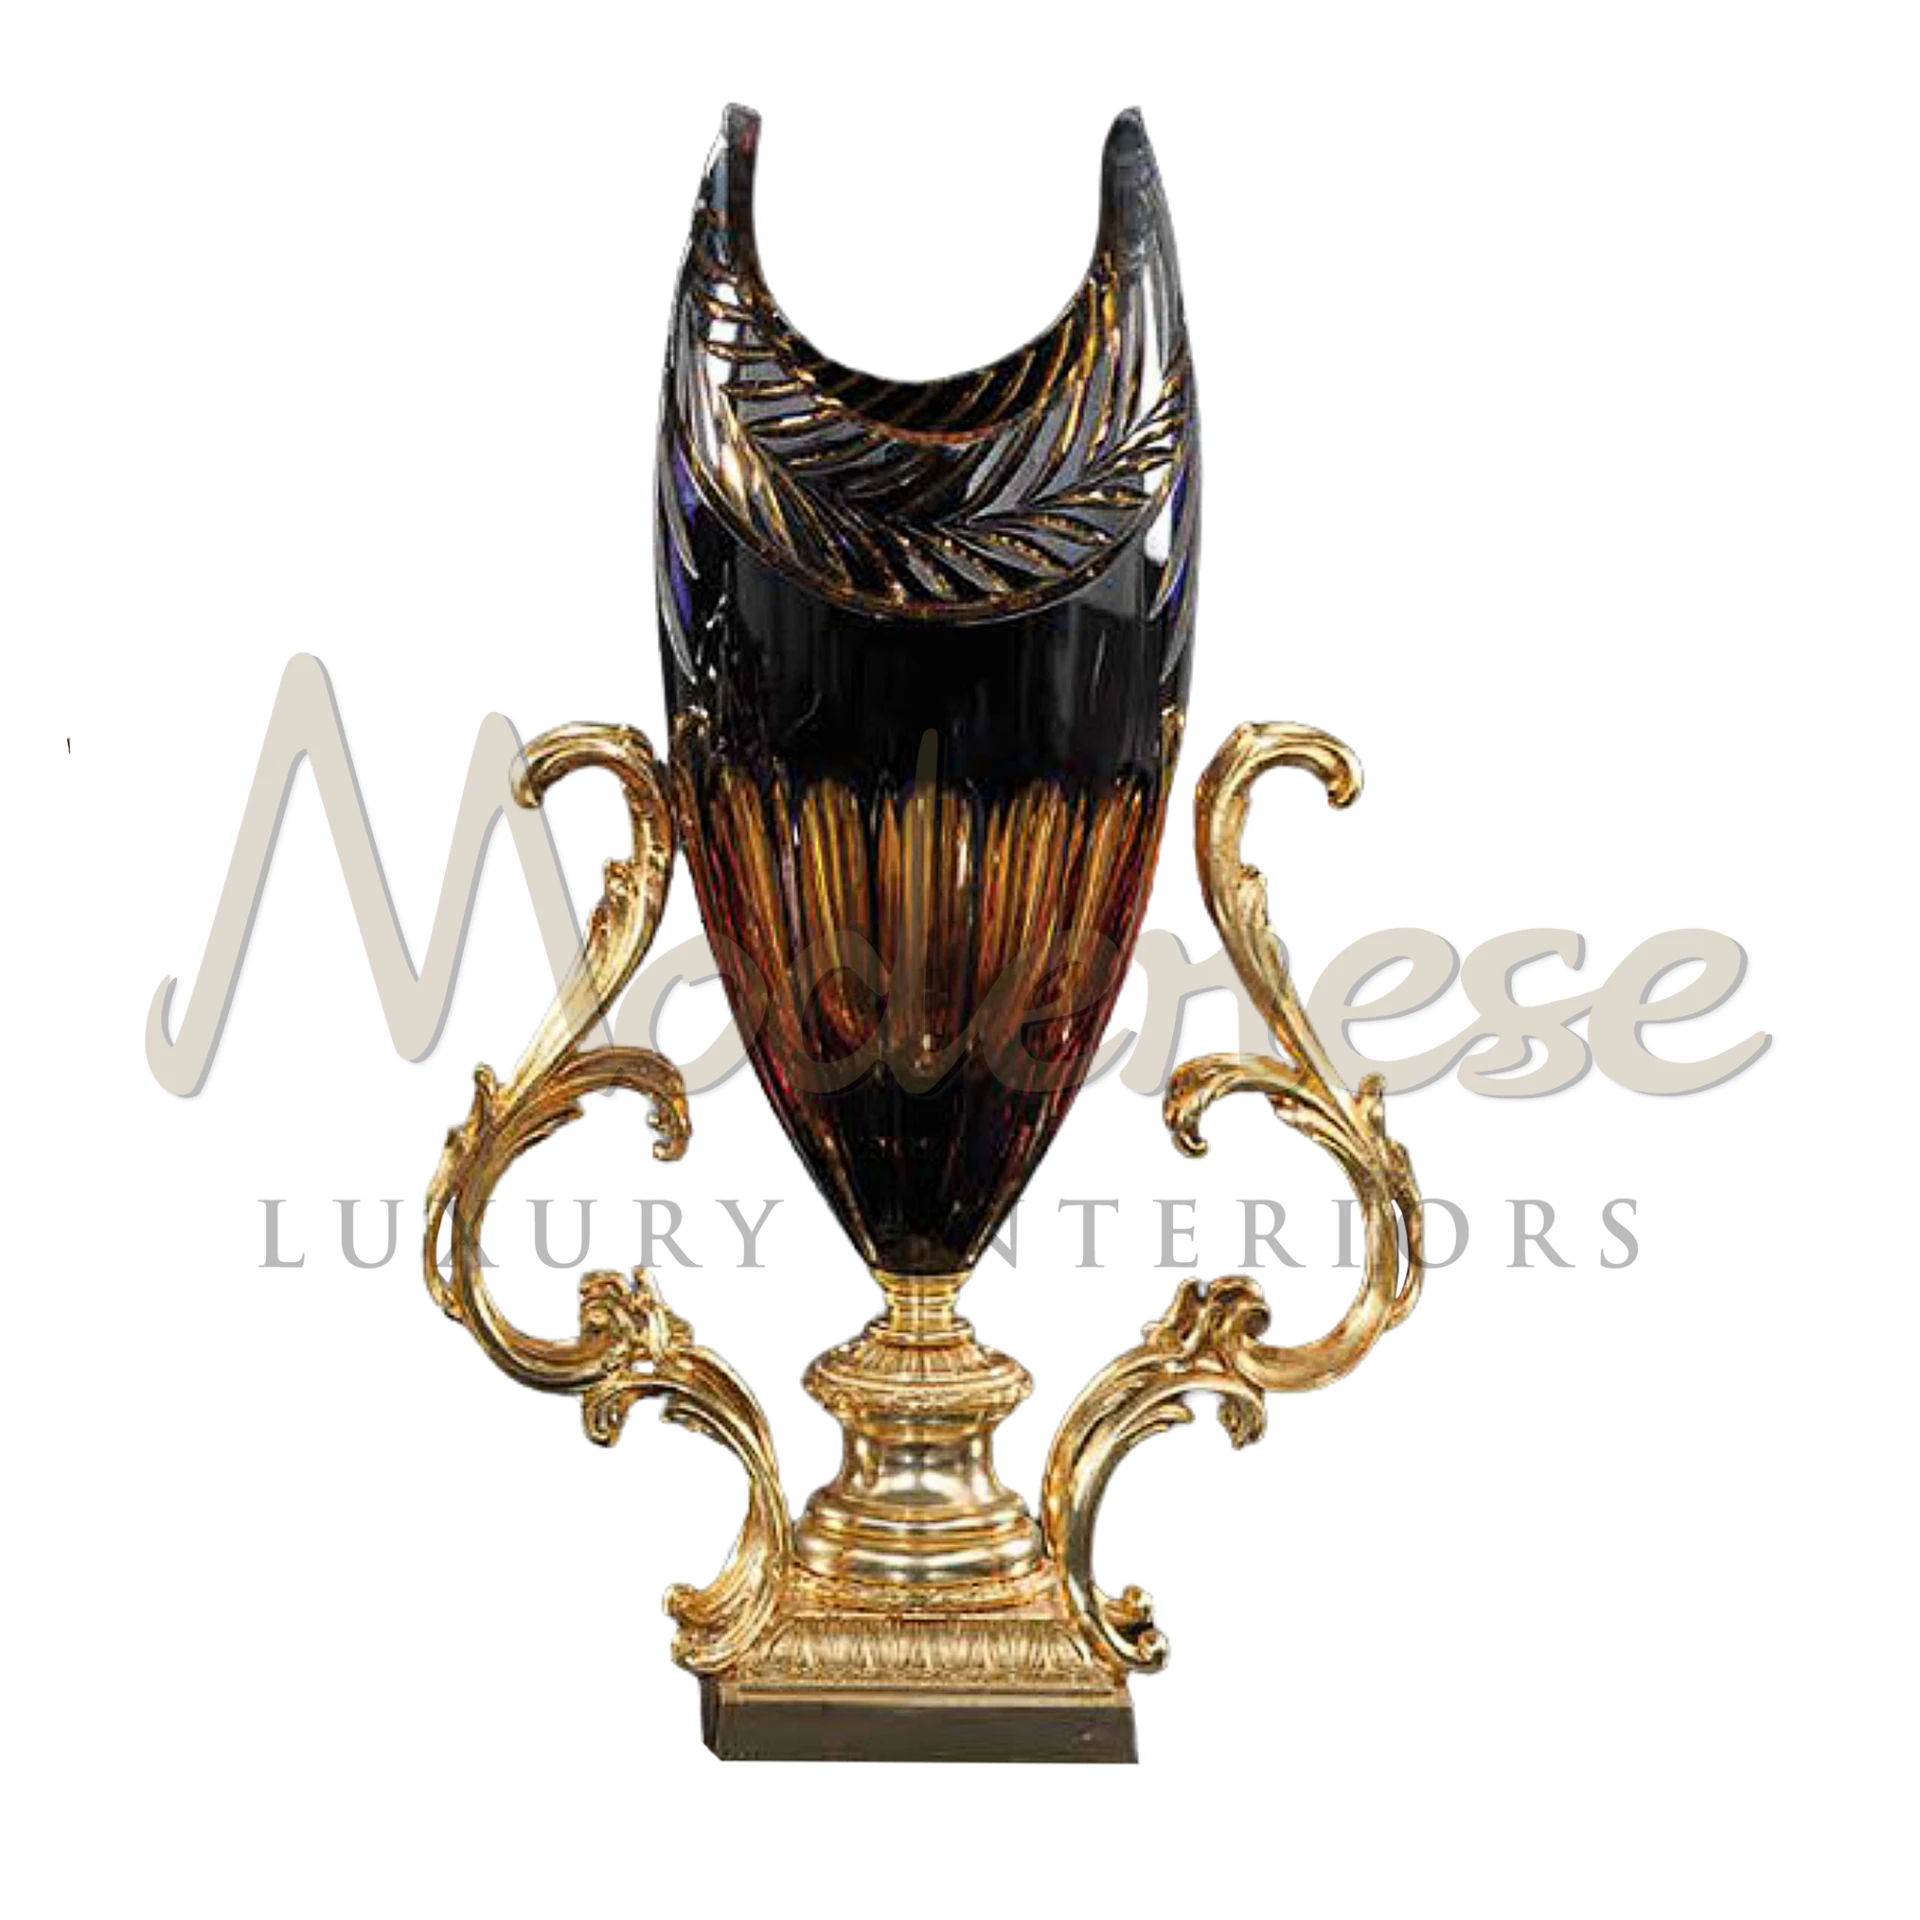 Elegant Traditional Figured Vase by Modenese, with luxury craftsmanship and classic patterns in high-quality glass.